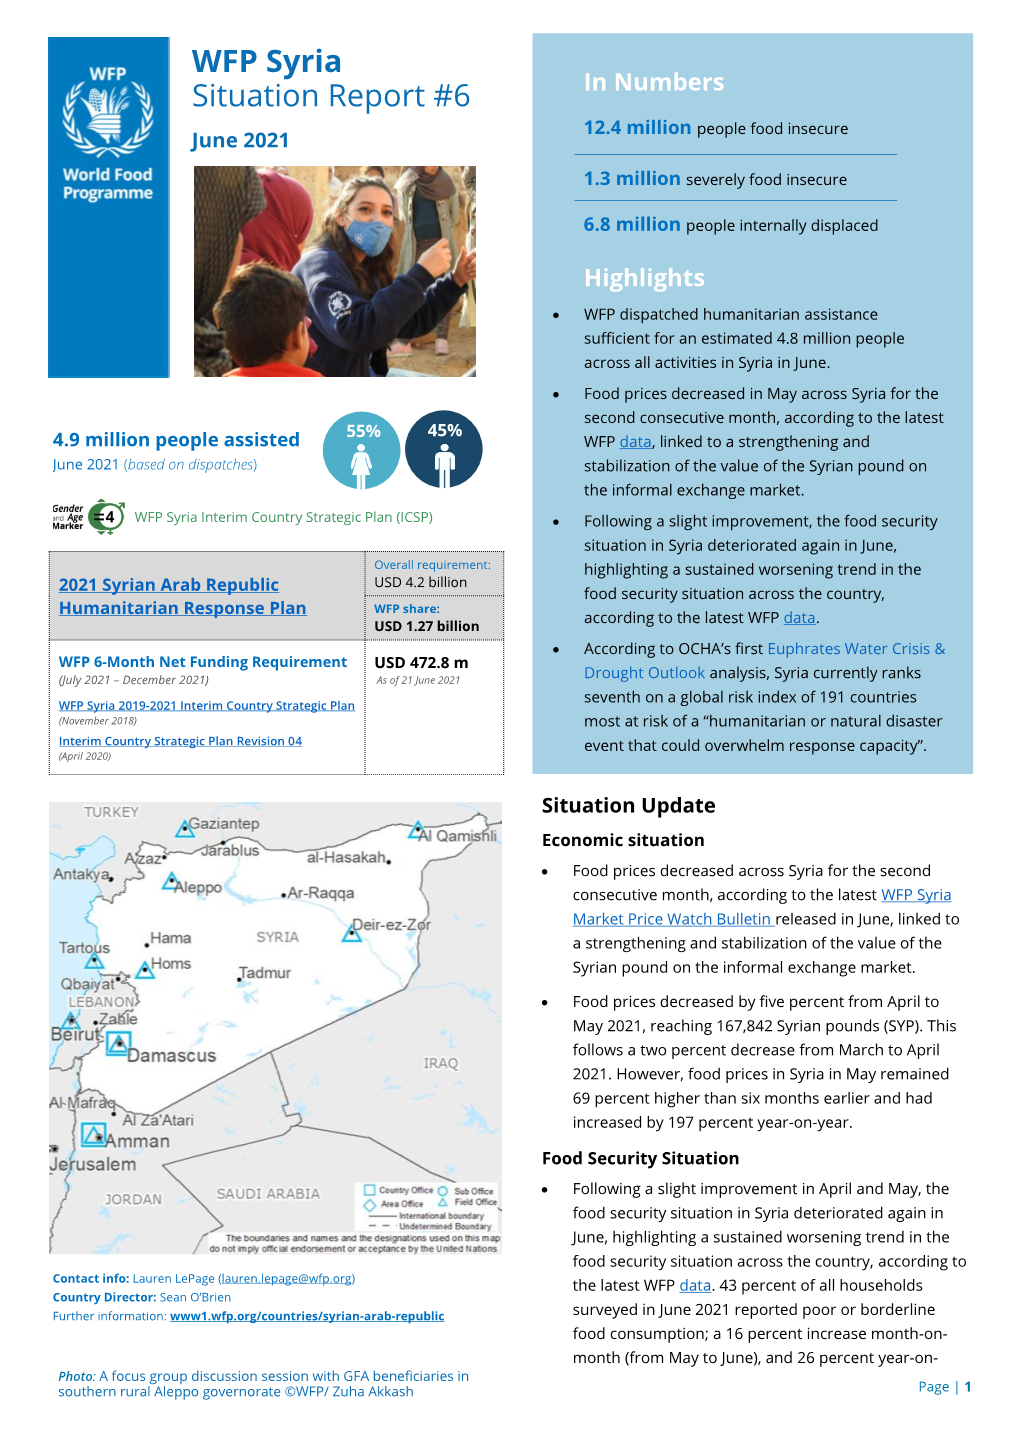 WFP Syria Situation Report #6 Page | 2 June 2021